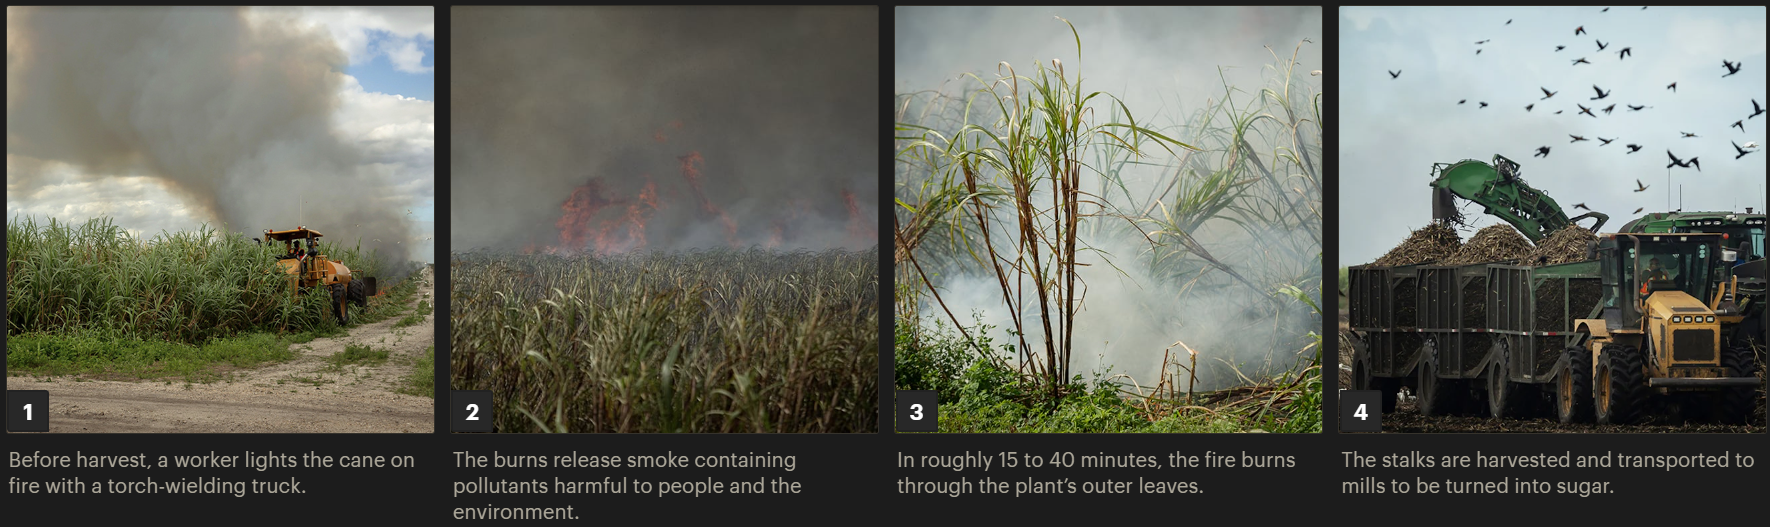 This series of four images shows how sugar cane is burned and harvested. In the first, a worker on a tractor is lighting a cane field on fire, smoke billowing up behind him. The second shows the burns, highlighting smoke coming up from the field. The third shows the aftermath of a burn, with plants' outer leaves withered and brown. The fourth shows cane stalks on a truck, about to travel to a mill.